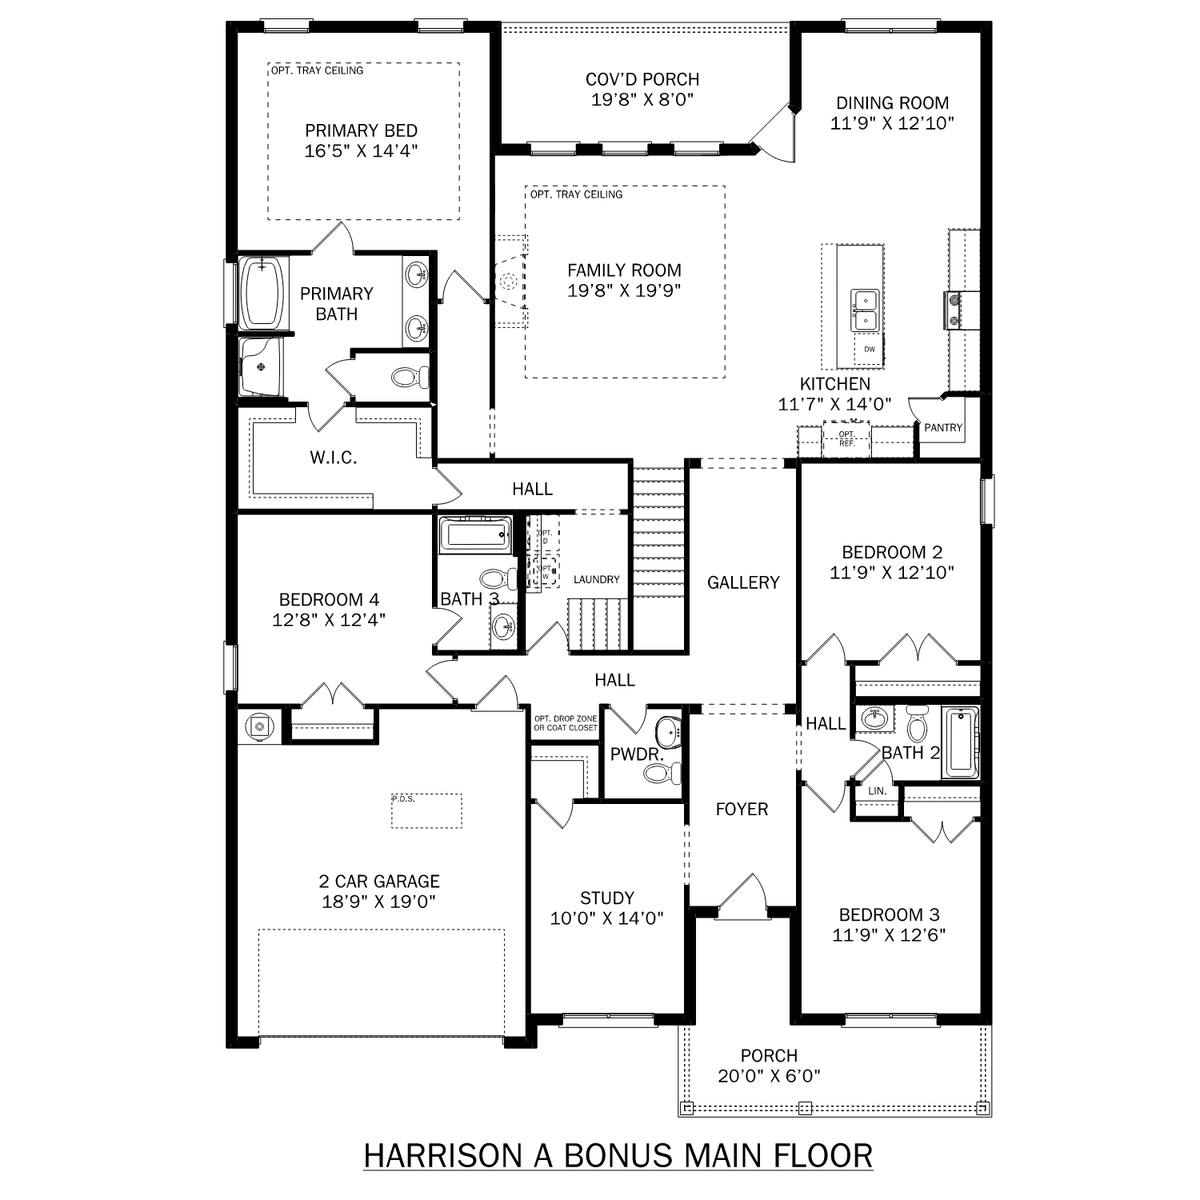 1 - The Harrison with Bonus buildable floor plan layout in Davidson Homes' Cain Park community.